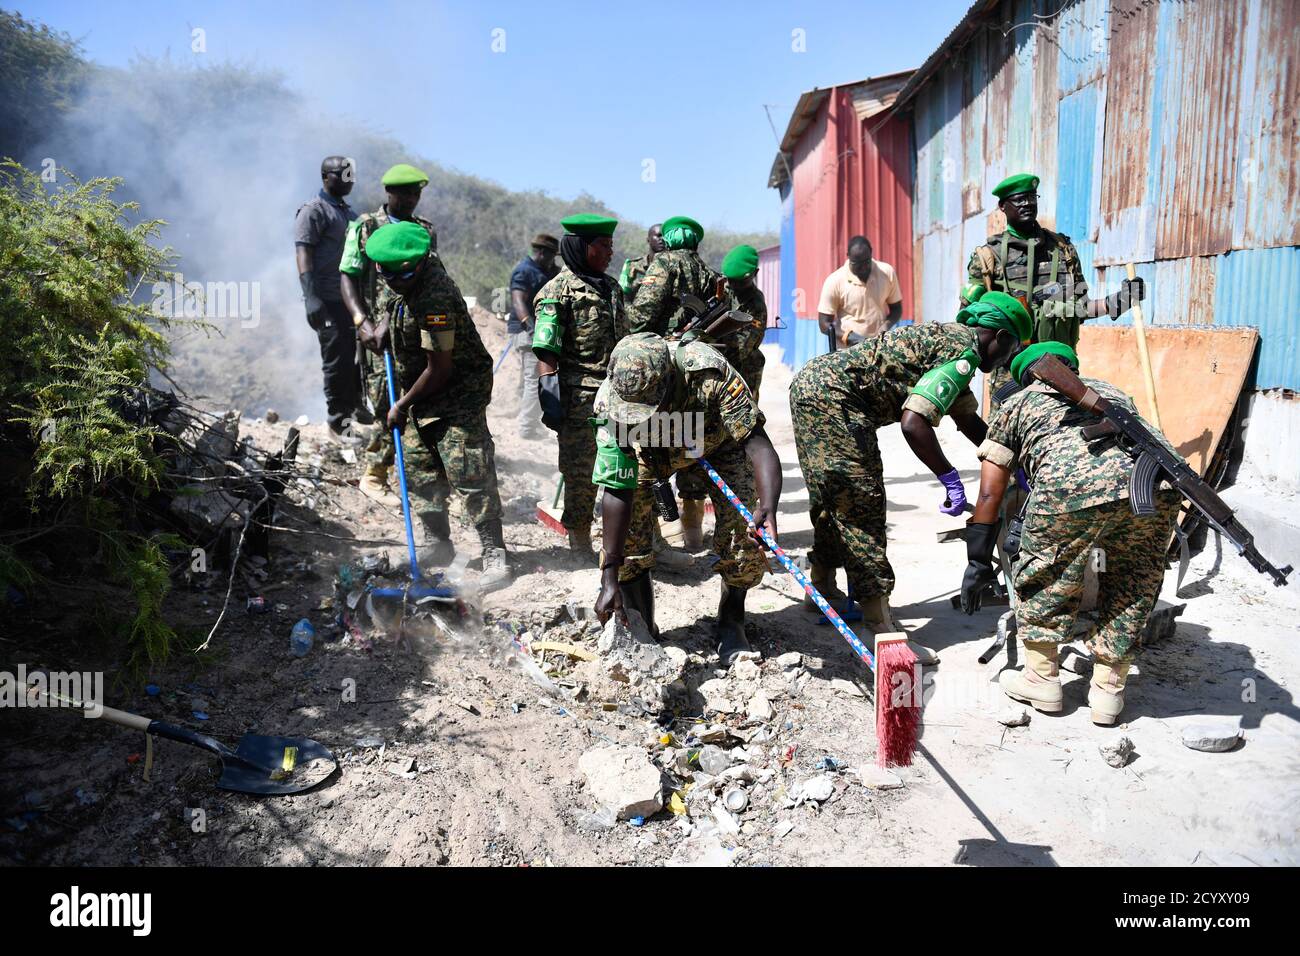 Ugandan soldiers serving under the African Union Mission in Somalia (AMISOM) carry out a community cleanup exercise in Mogadishu, Somalia on February 06, 2019. This was part of activities organised by the Ugandan military to mark 'Tarehe Sita' day in commemoration of the 38th anniversary of the founding of the Uganda People's Defence Forces (UPDF) on 06 February 1981. Stock Photo